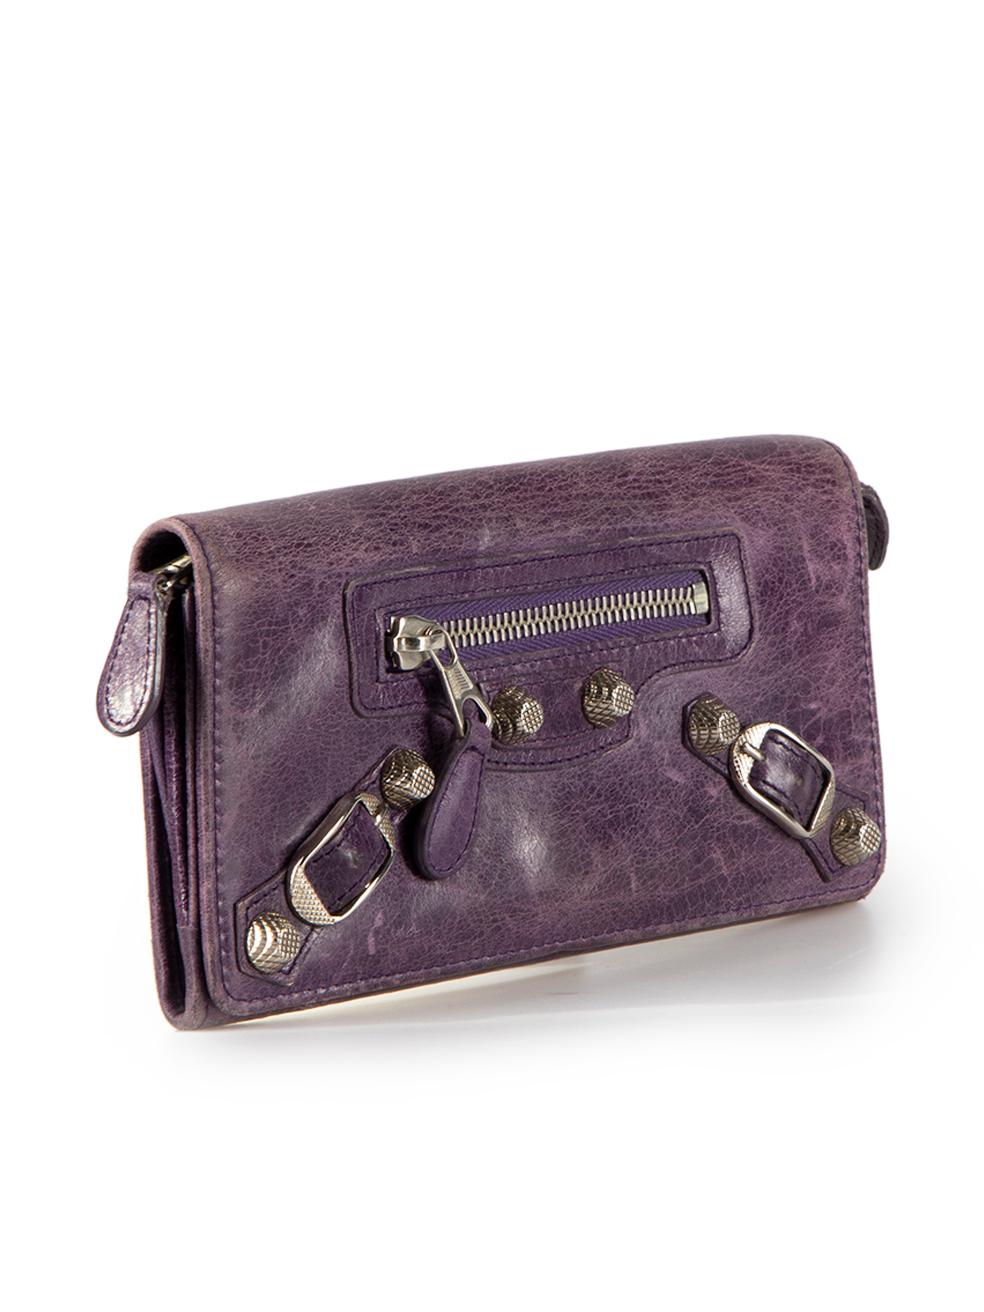 CONDITION is Good. General wear to clutch is evident. Moderate signs of wear to overall leather with scuff marks and scratches to outer corners and over front flap on this used Balenciaga designer resale item.
 
Details
Giant 12
Purple
Raisin